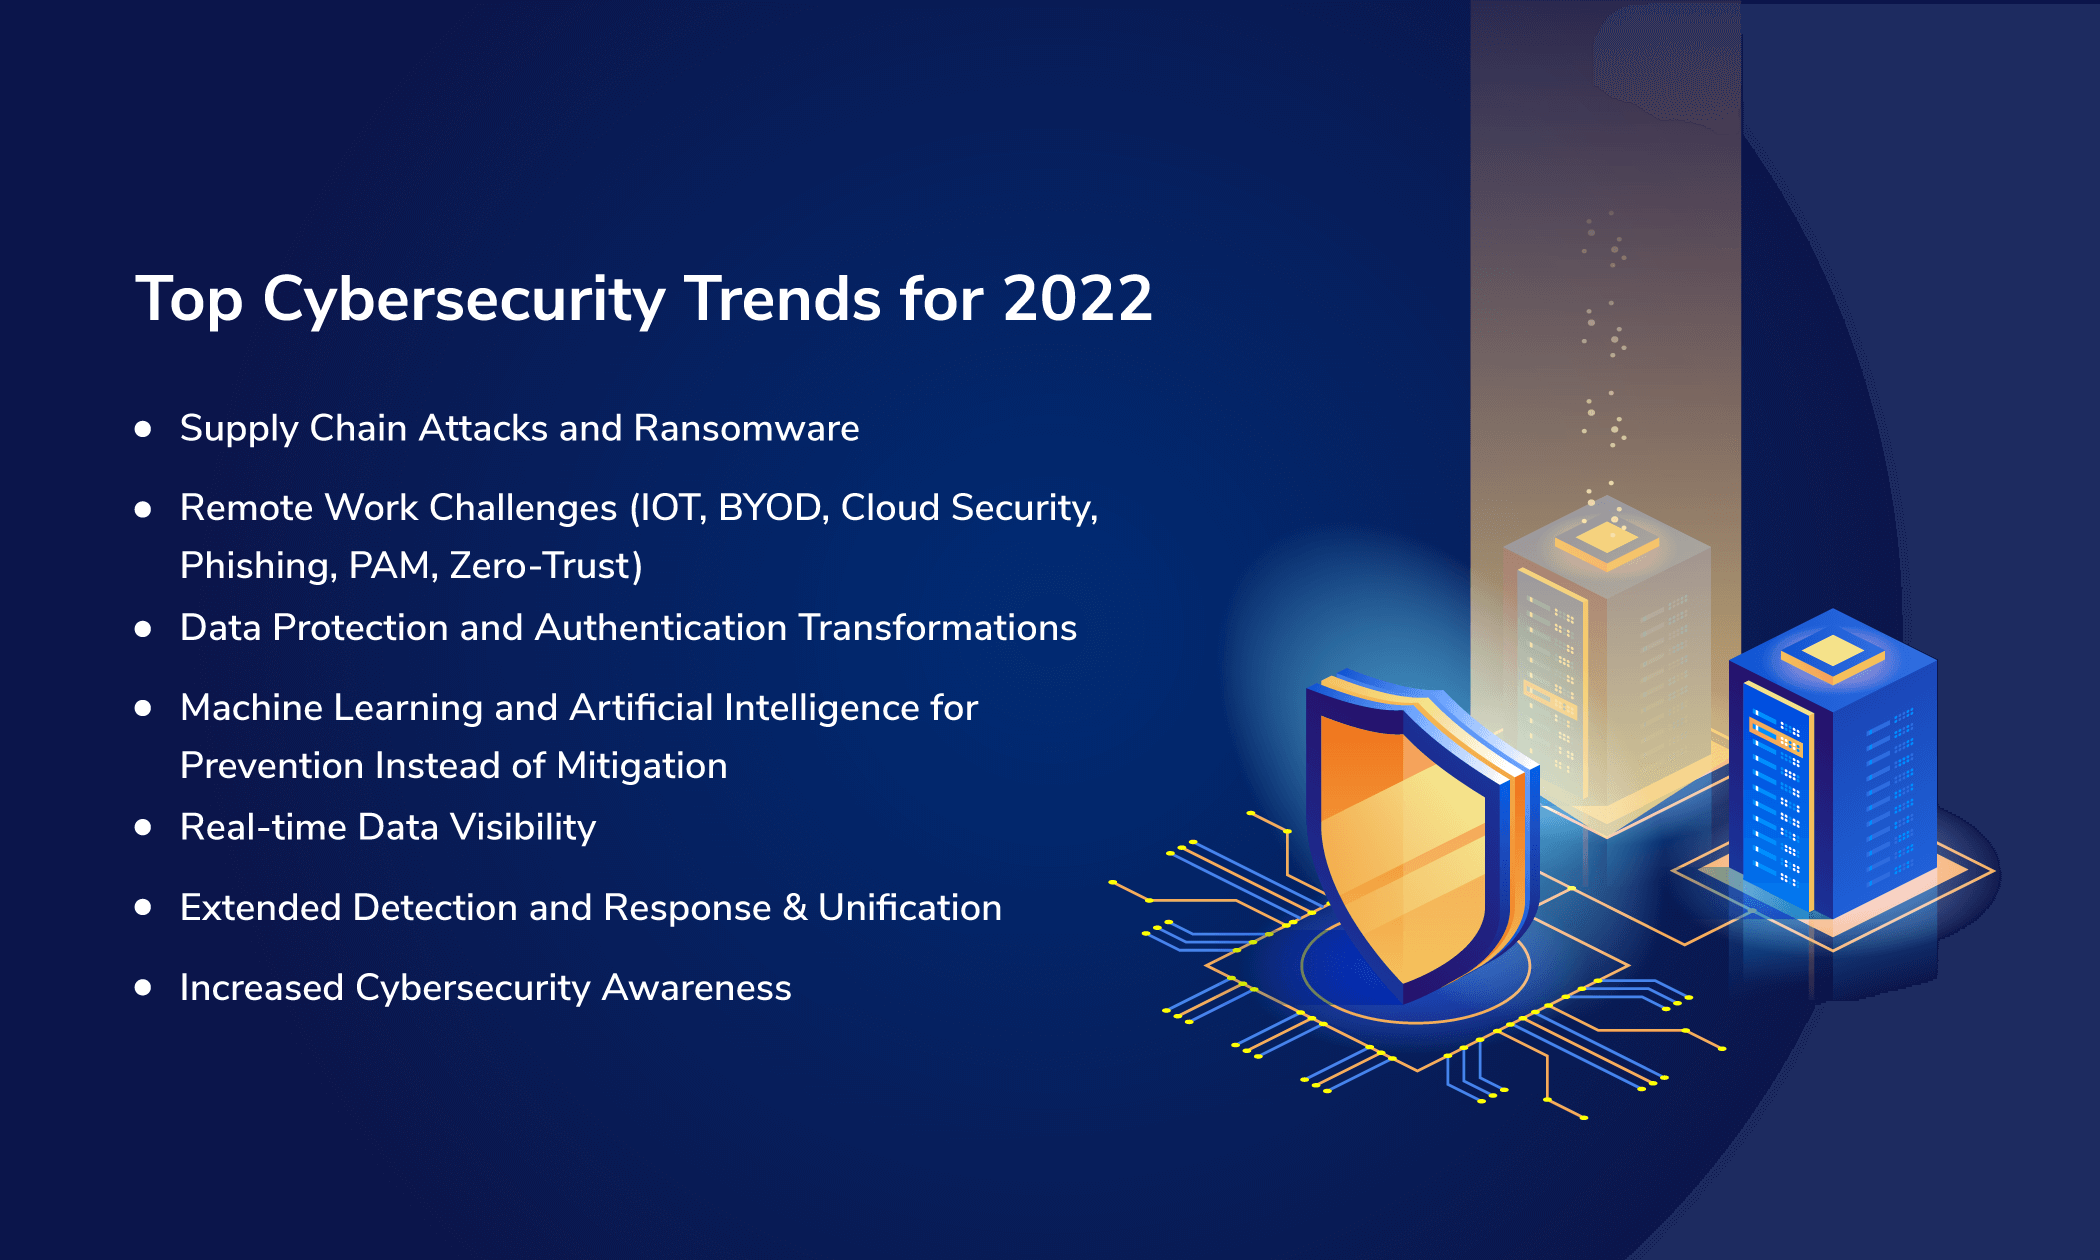 cloud computing security issues 2022